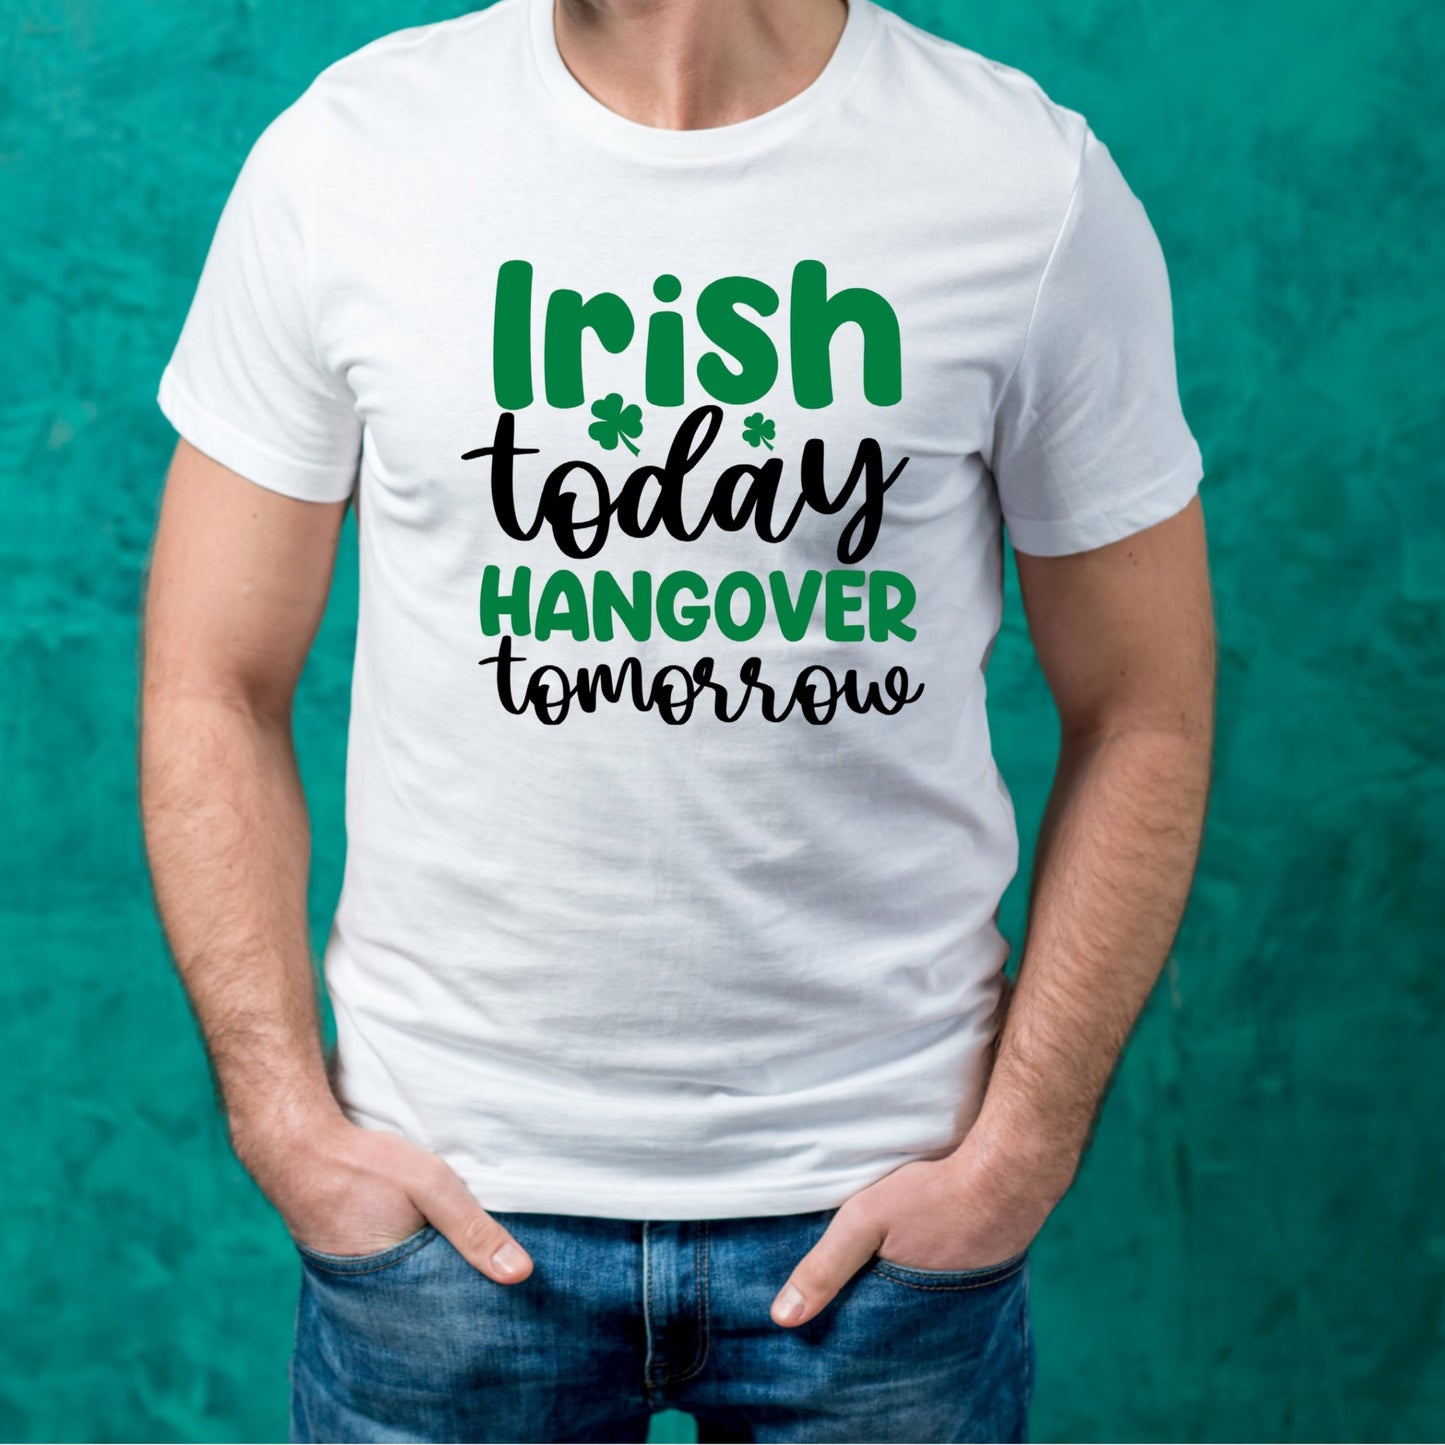 Irish Today T-Shirt For hangover T Shirt For Drinking T Shirt For St. Patrick's Day Tee